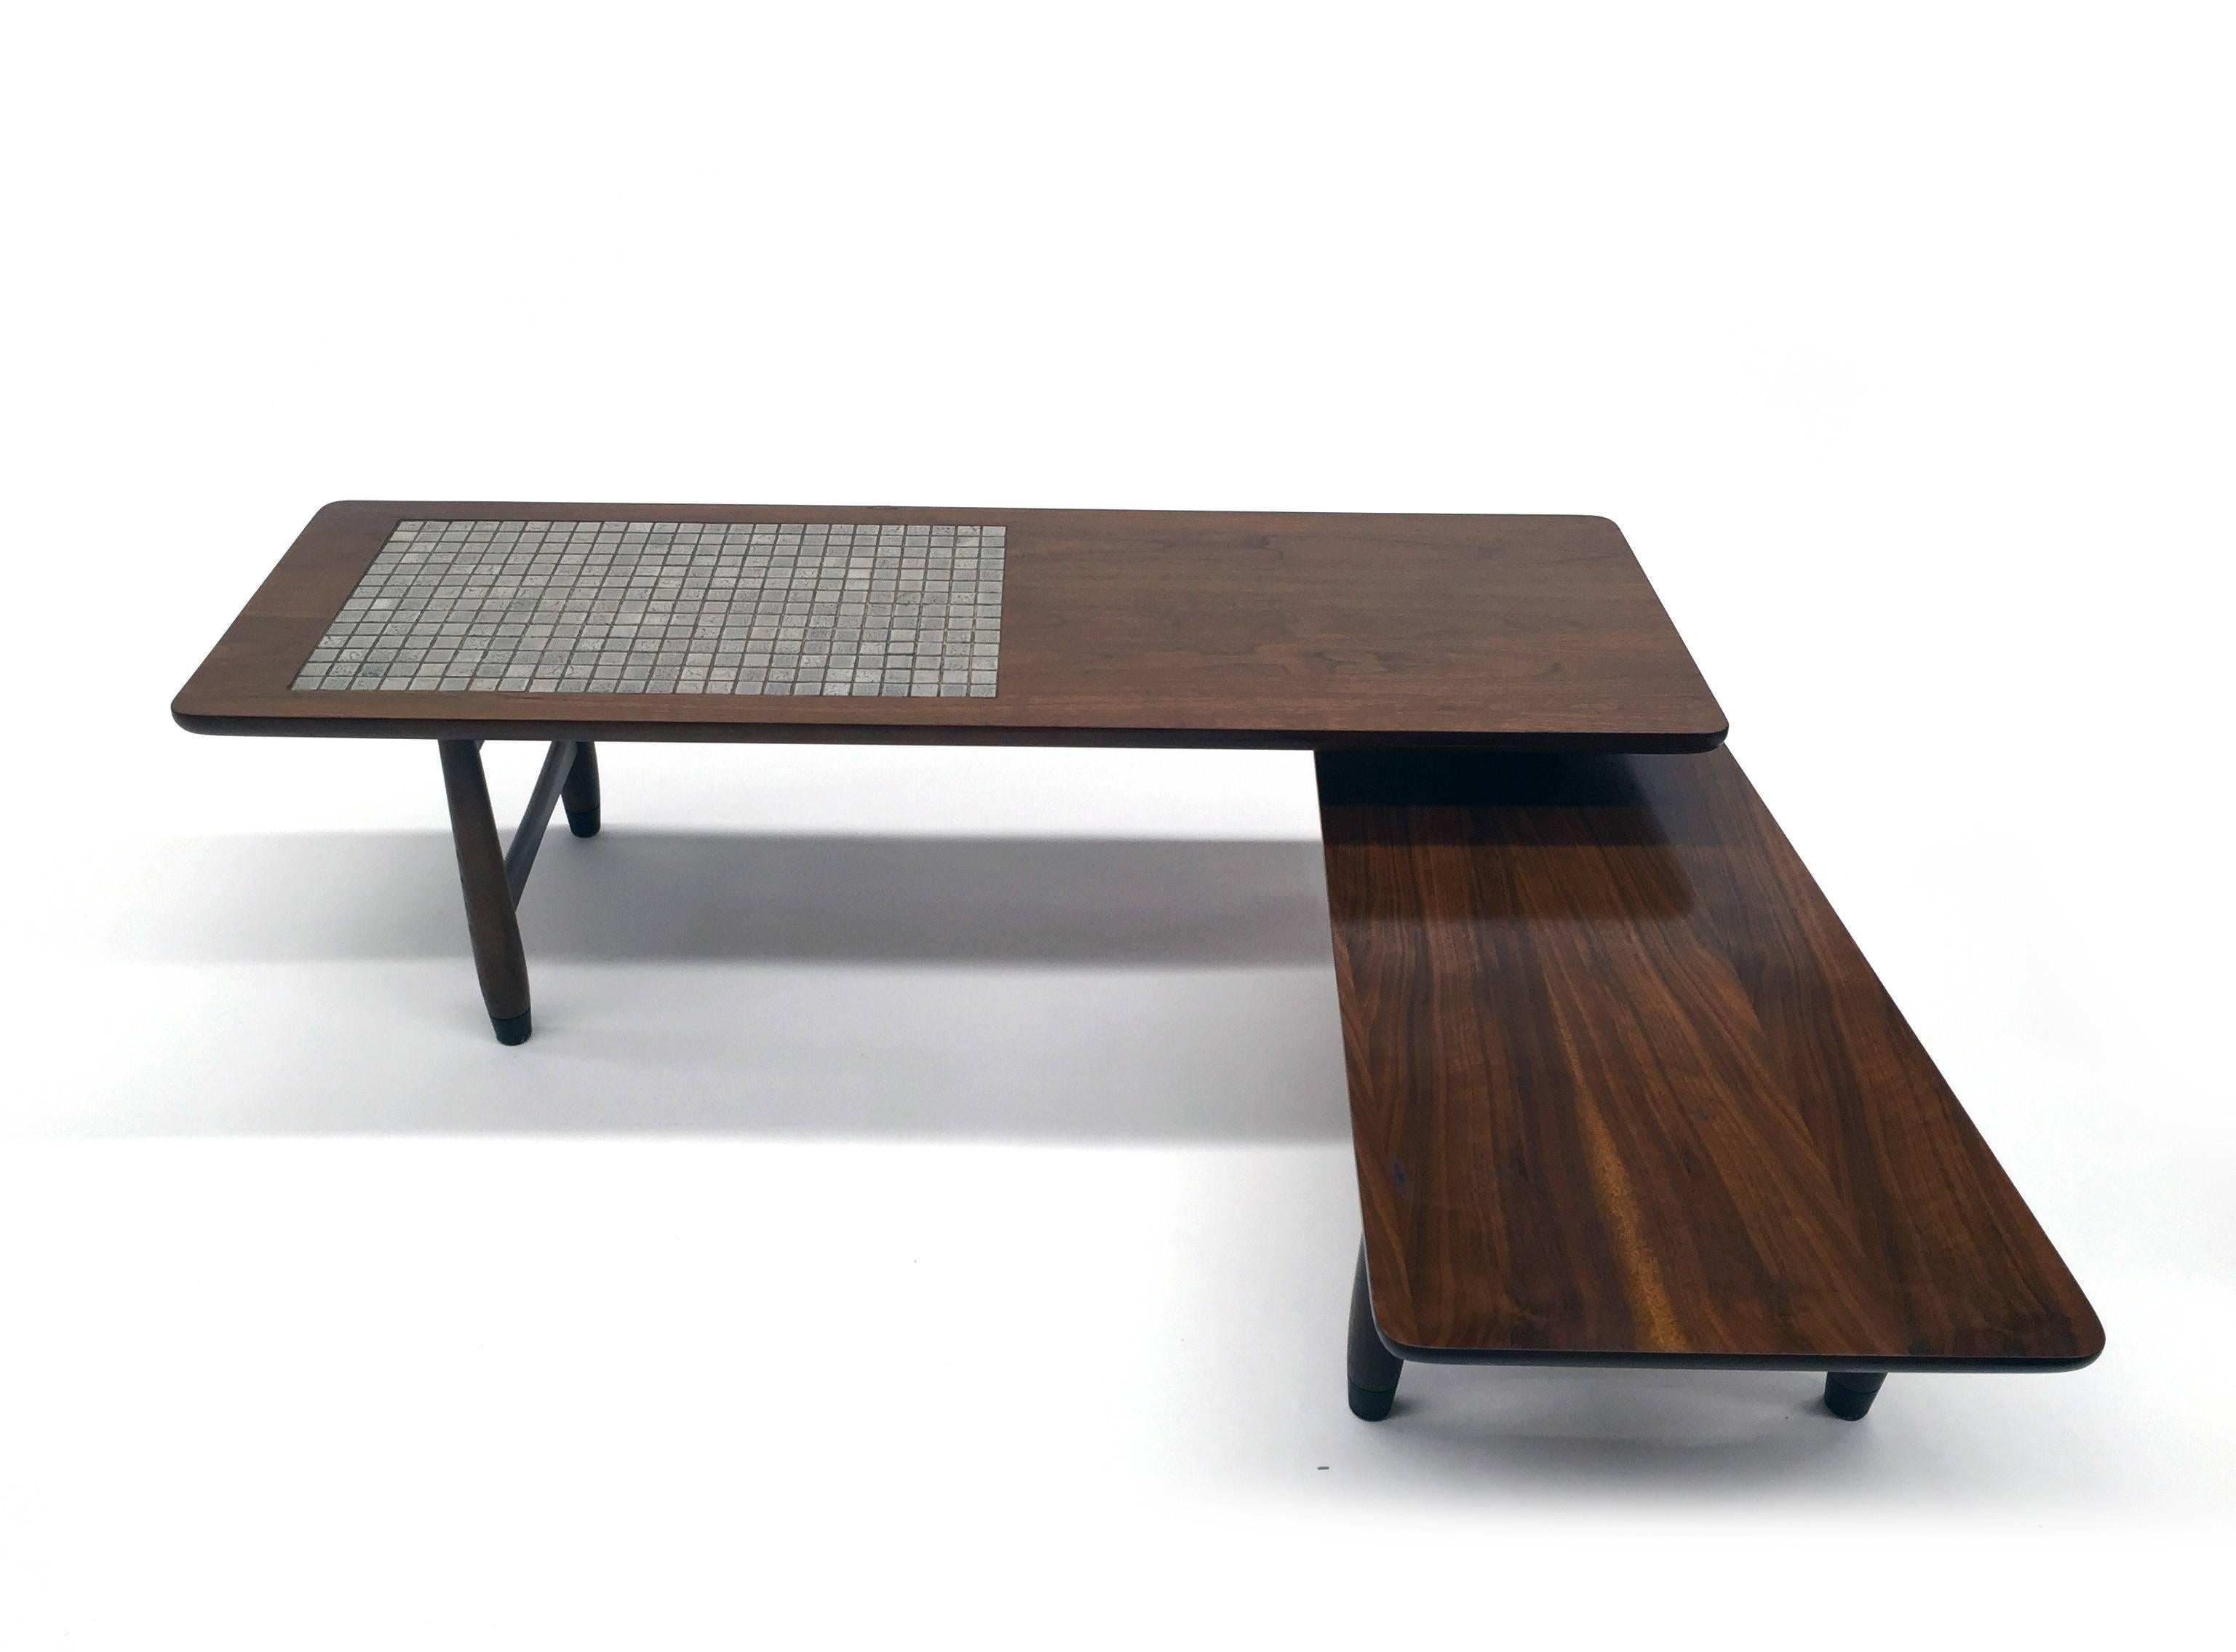 Striking American designed coffee table by Lane Furniture Company. Second tier swivels out for versatile design and functionality. Top tier has the hard to find ceramic tile that is in excellent condition.